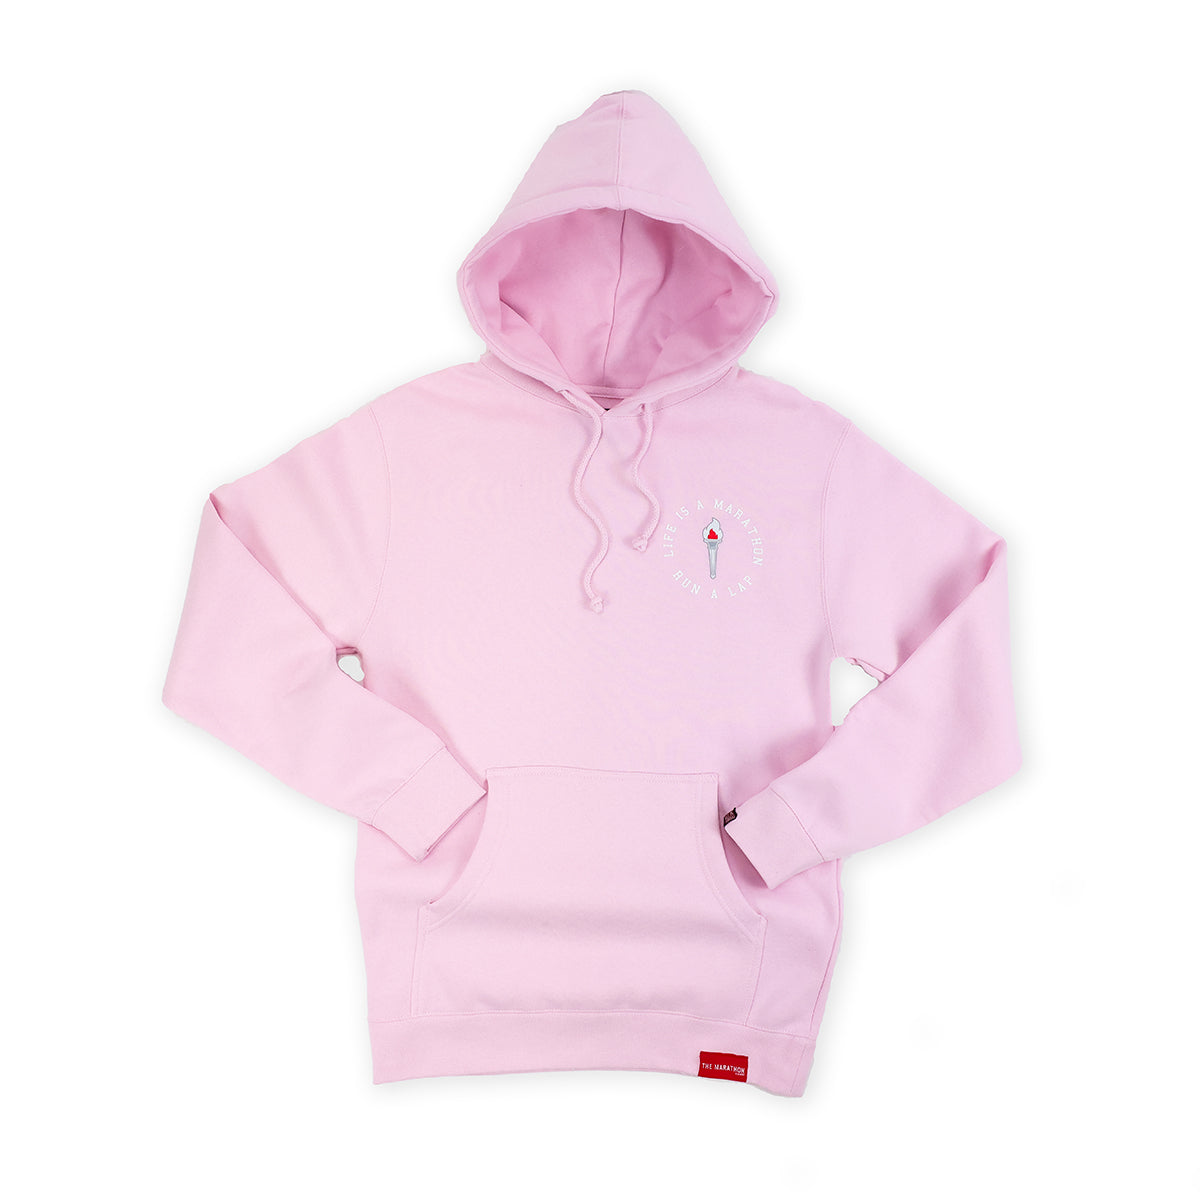 Victory Torch Hoodie - Soft Pink - Front